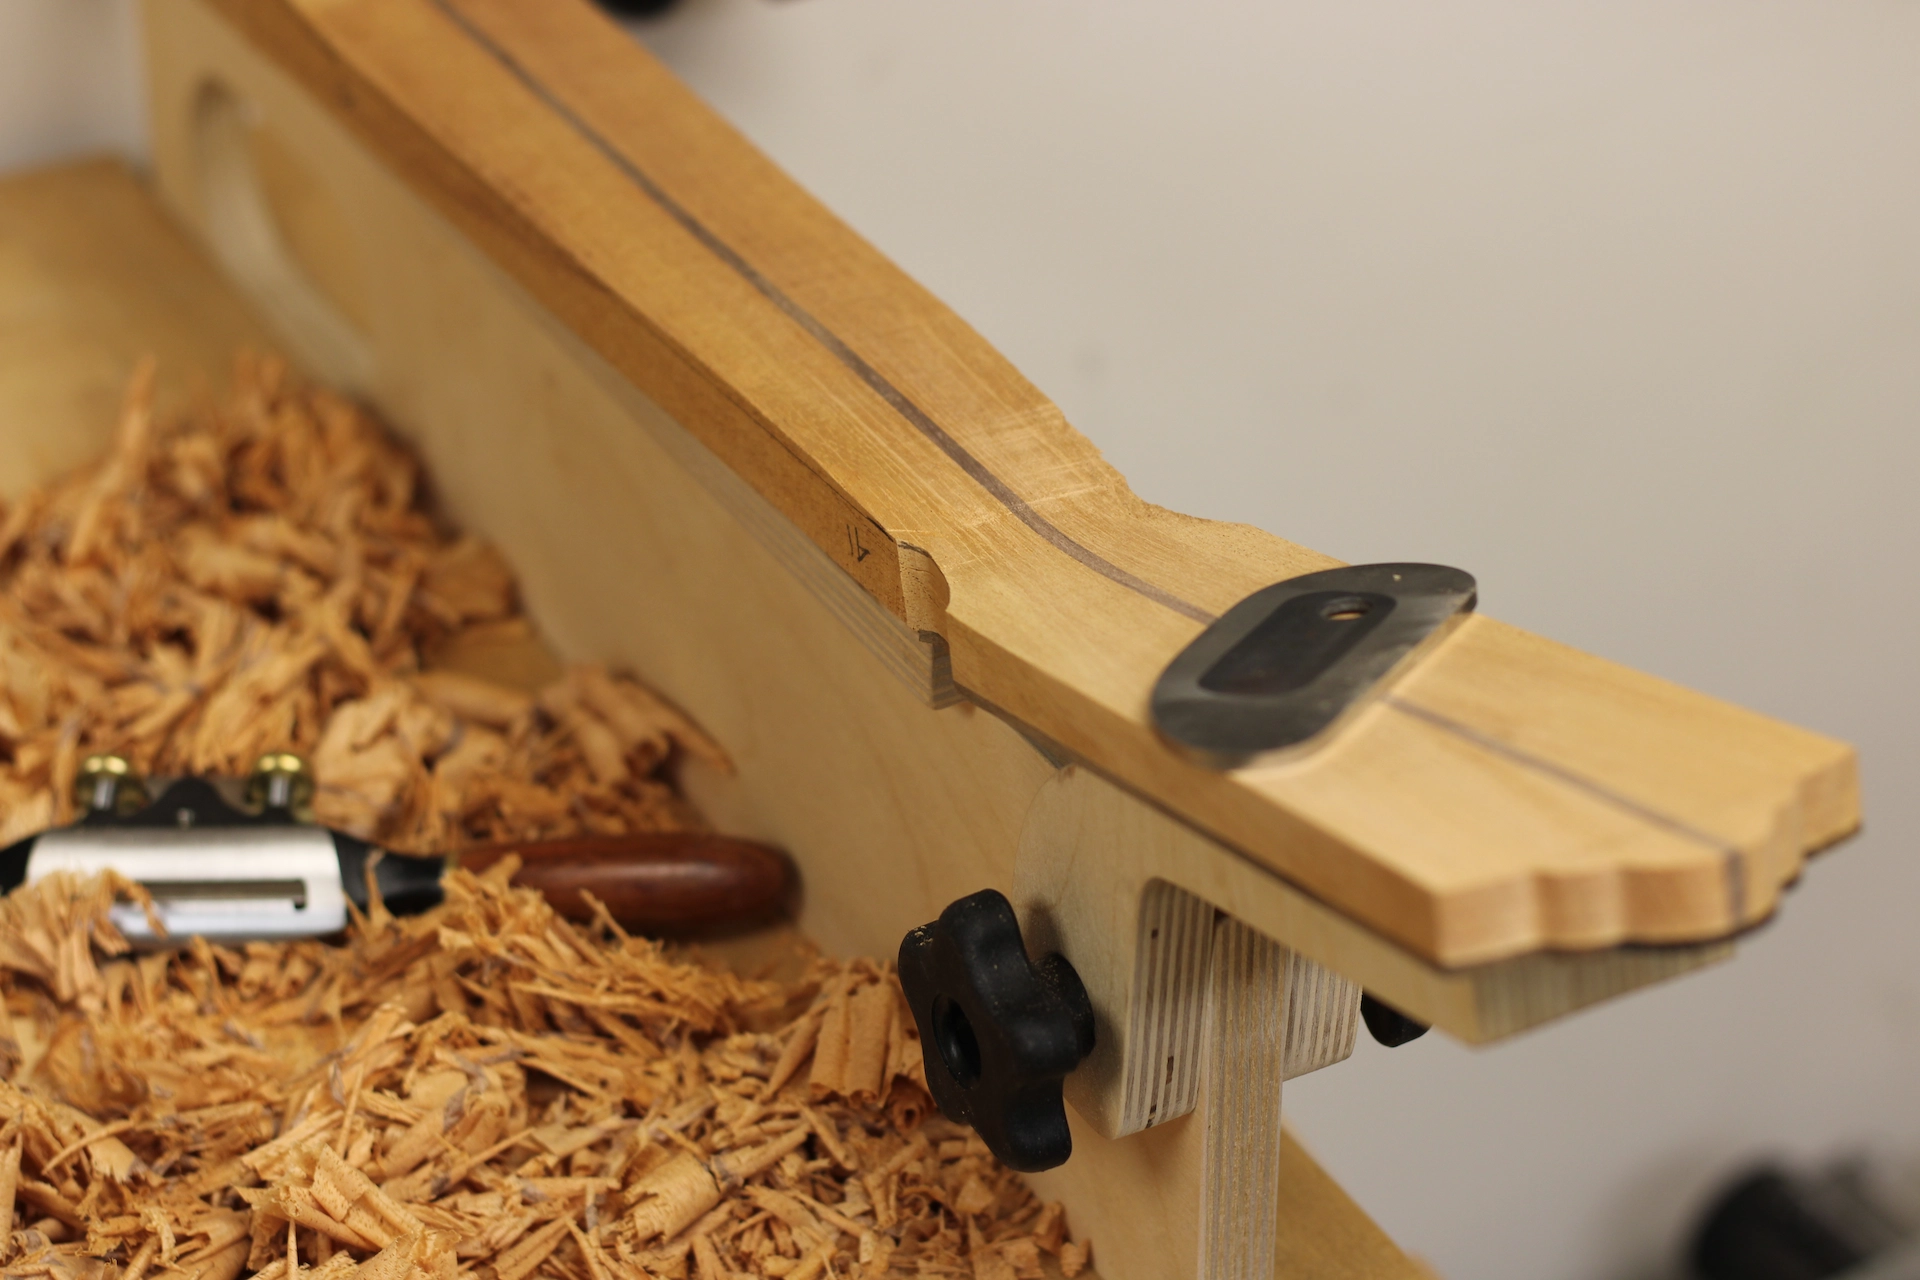 Spokeshave and Scraper to thickness the Headstock